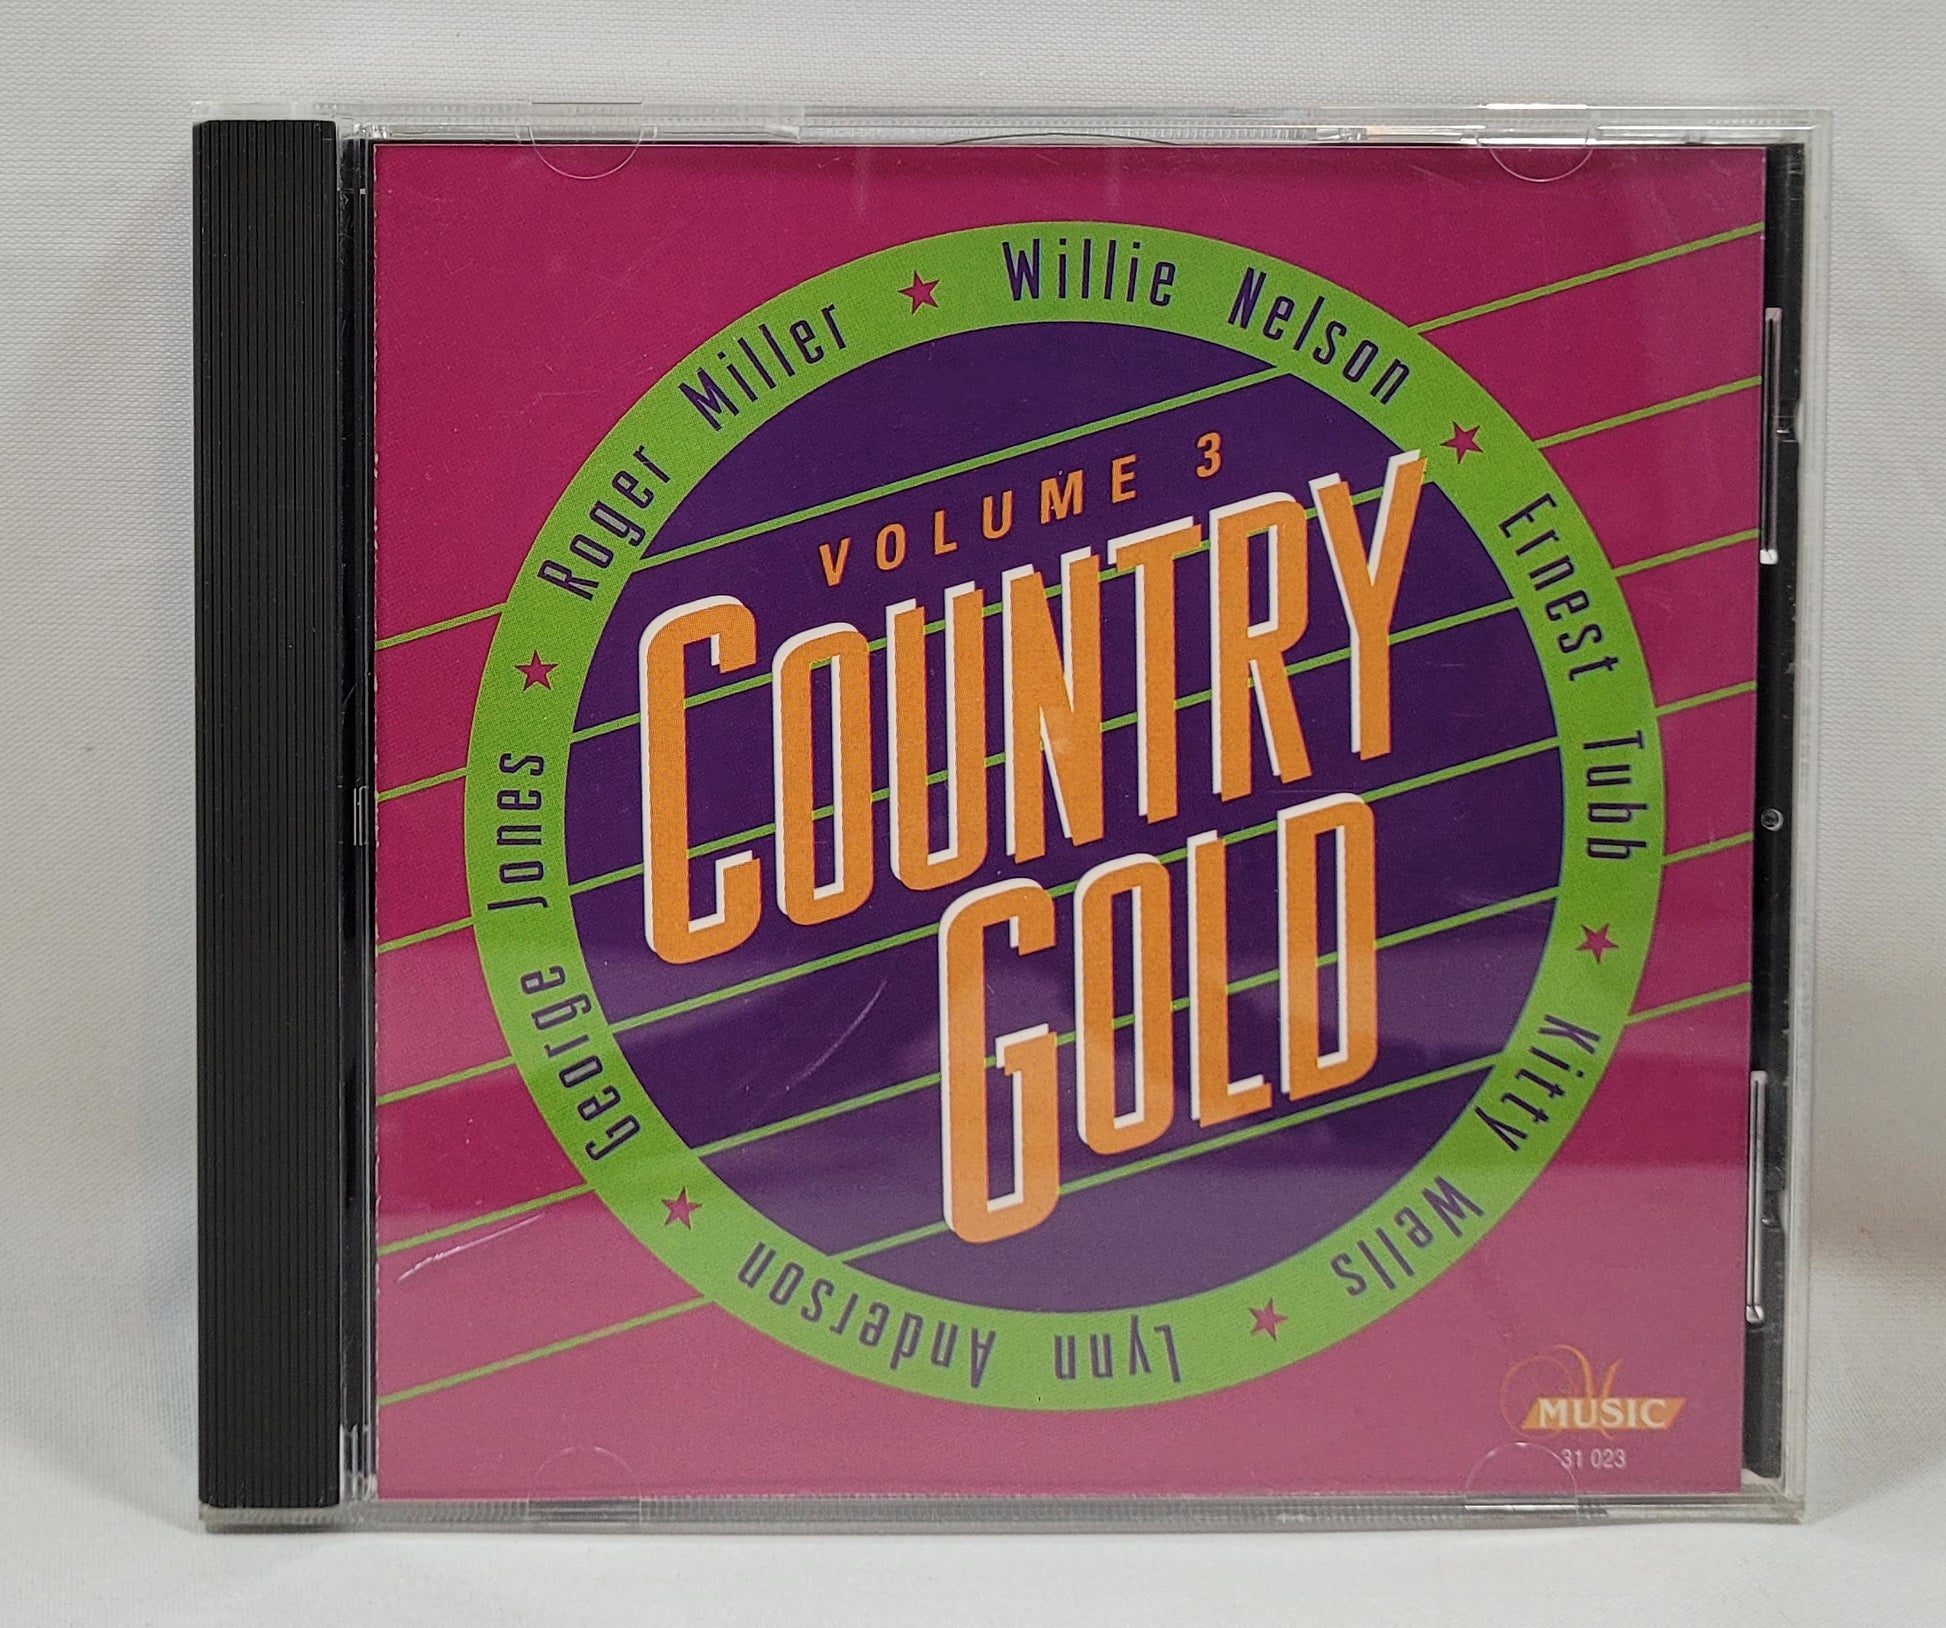 Various - Country Gold Volume 3 [1994 Compilation] [Used CD] [B]